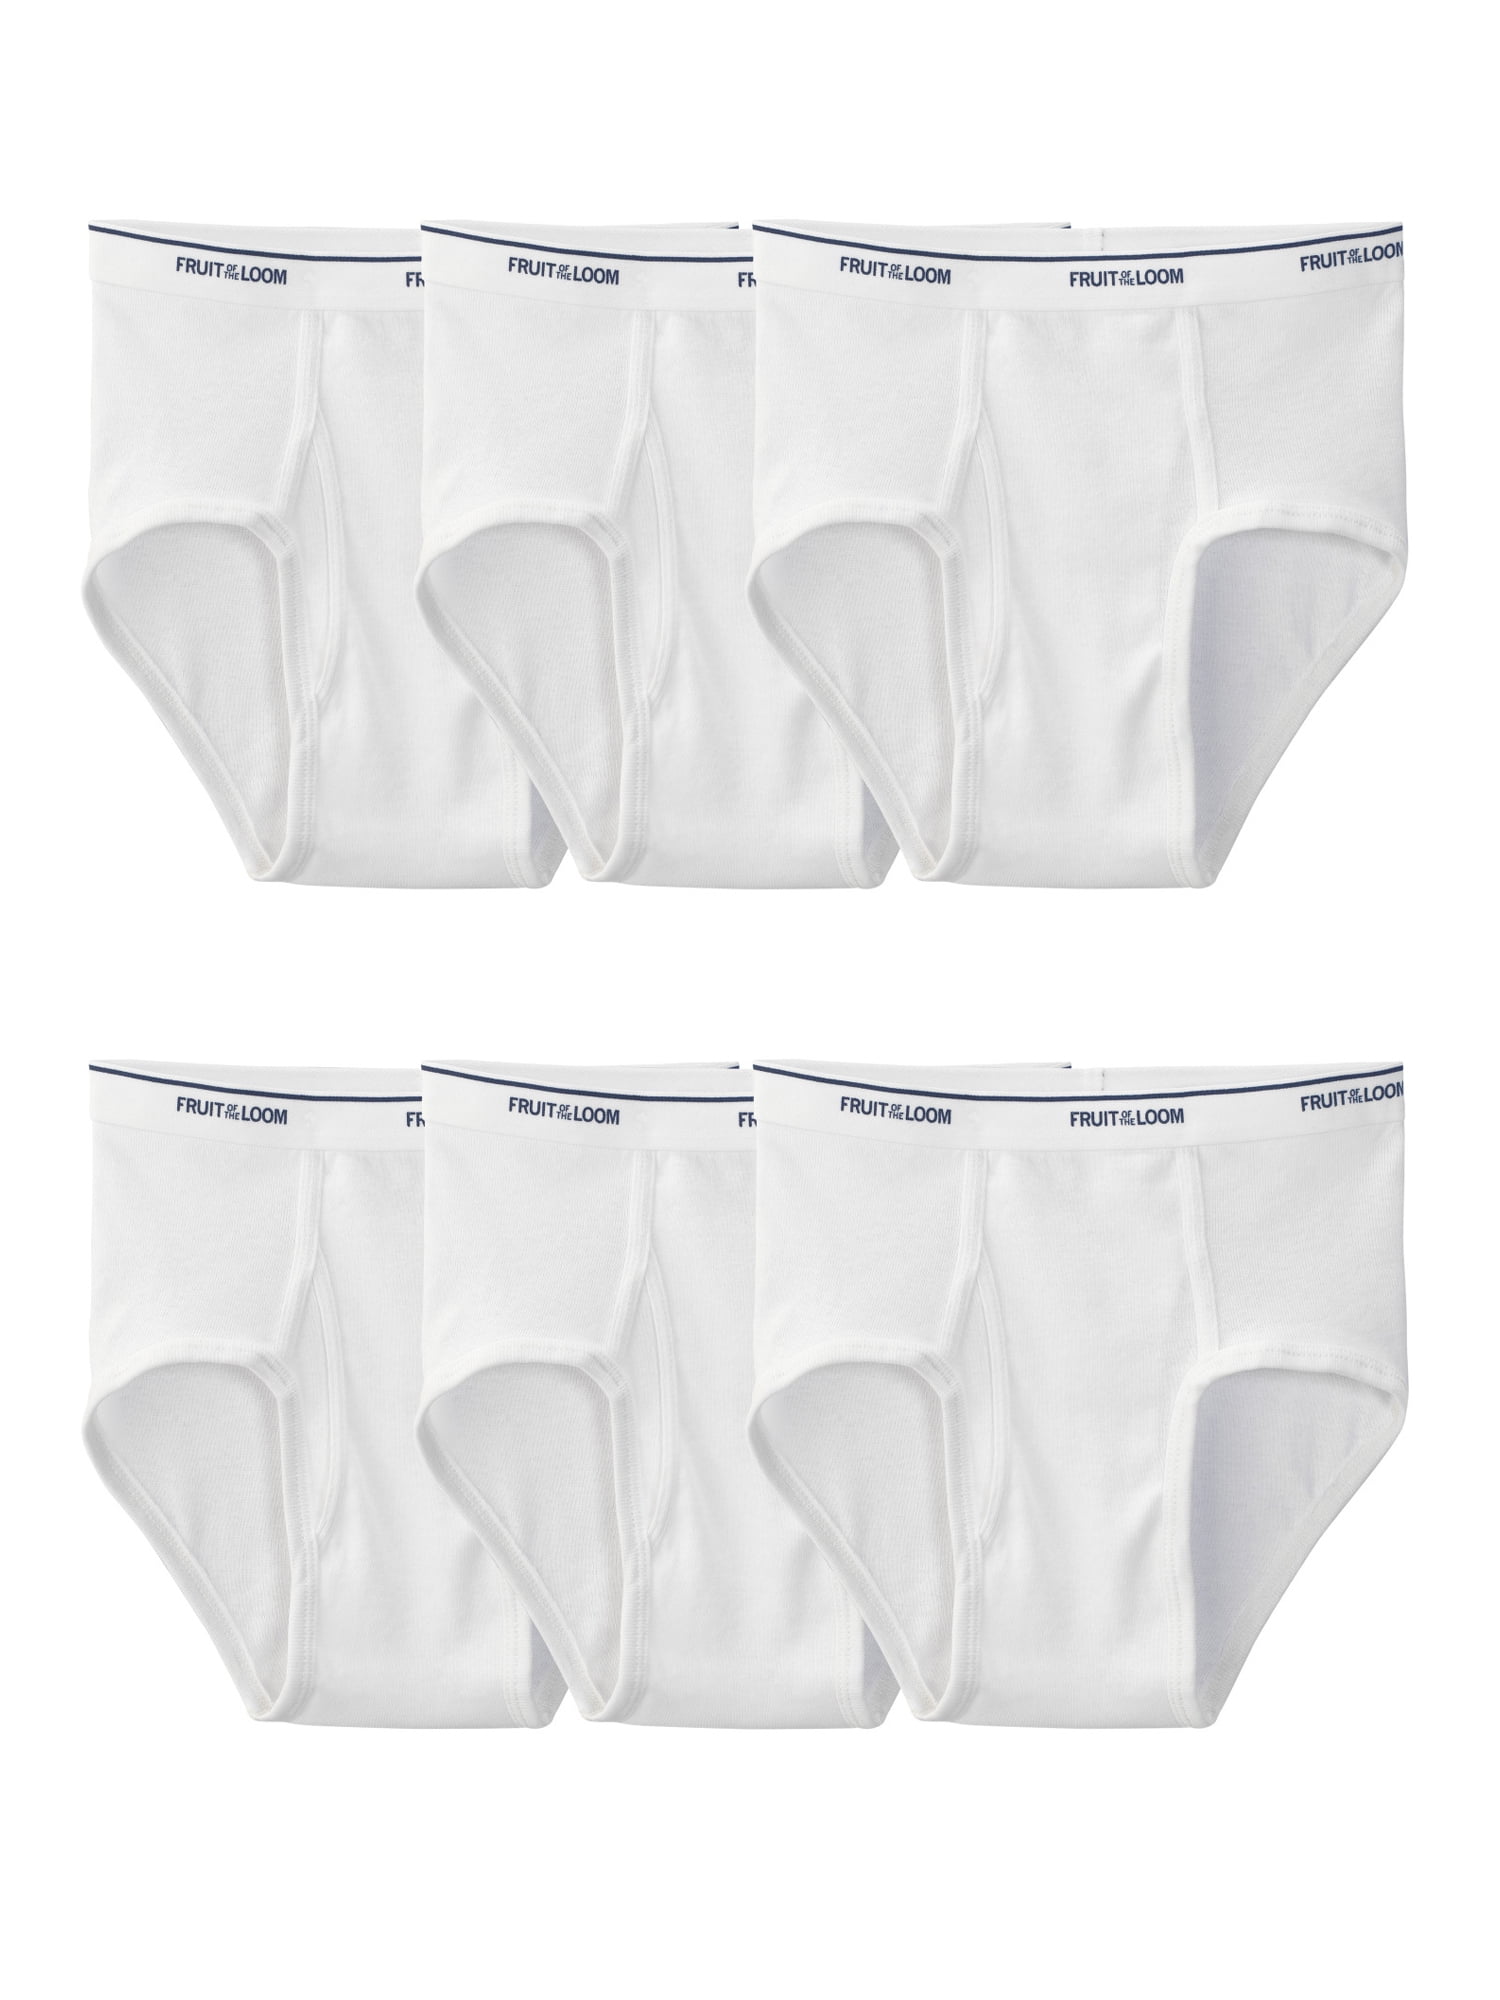 Fruit of the Loom Mens White Briefs, 6 Pack